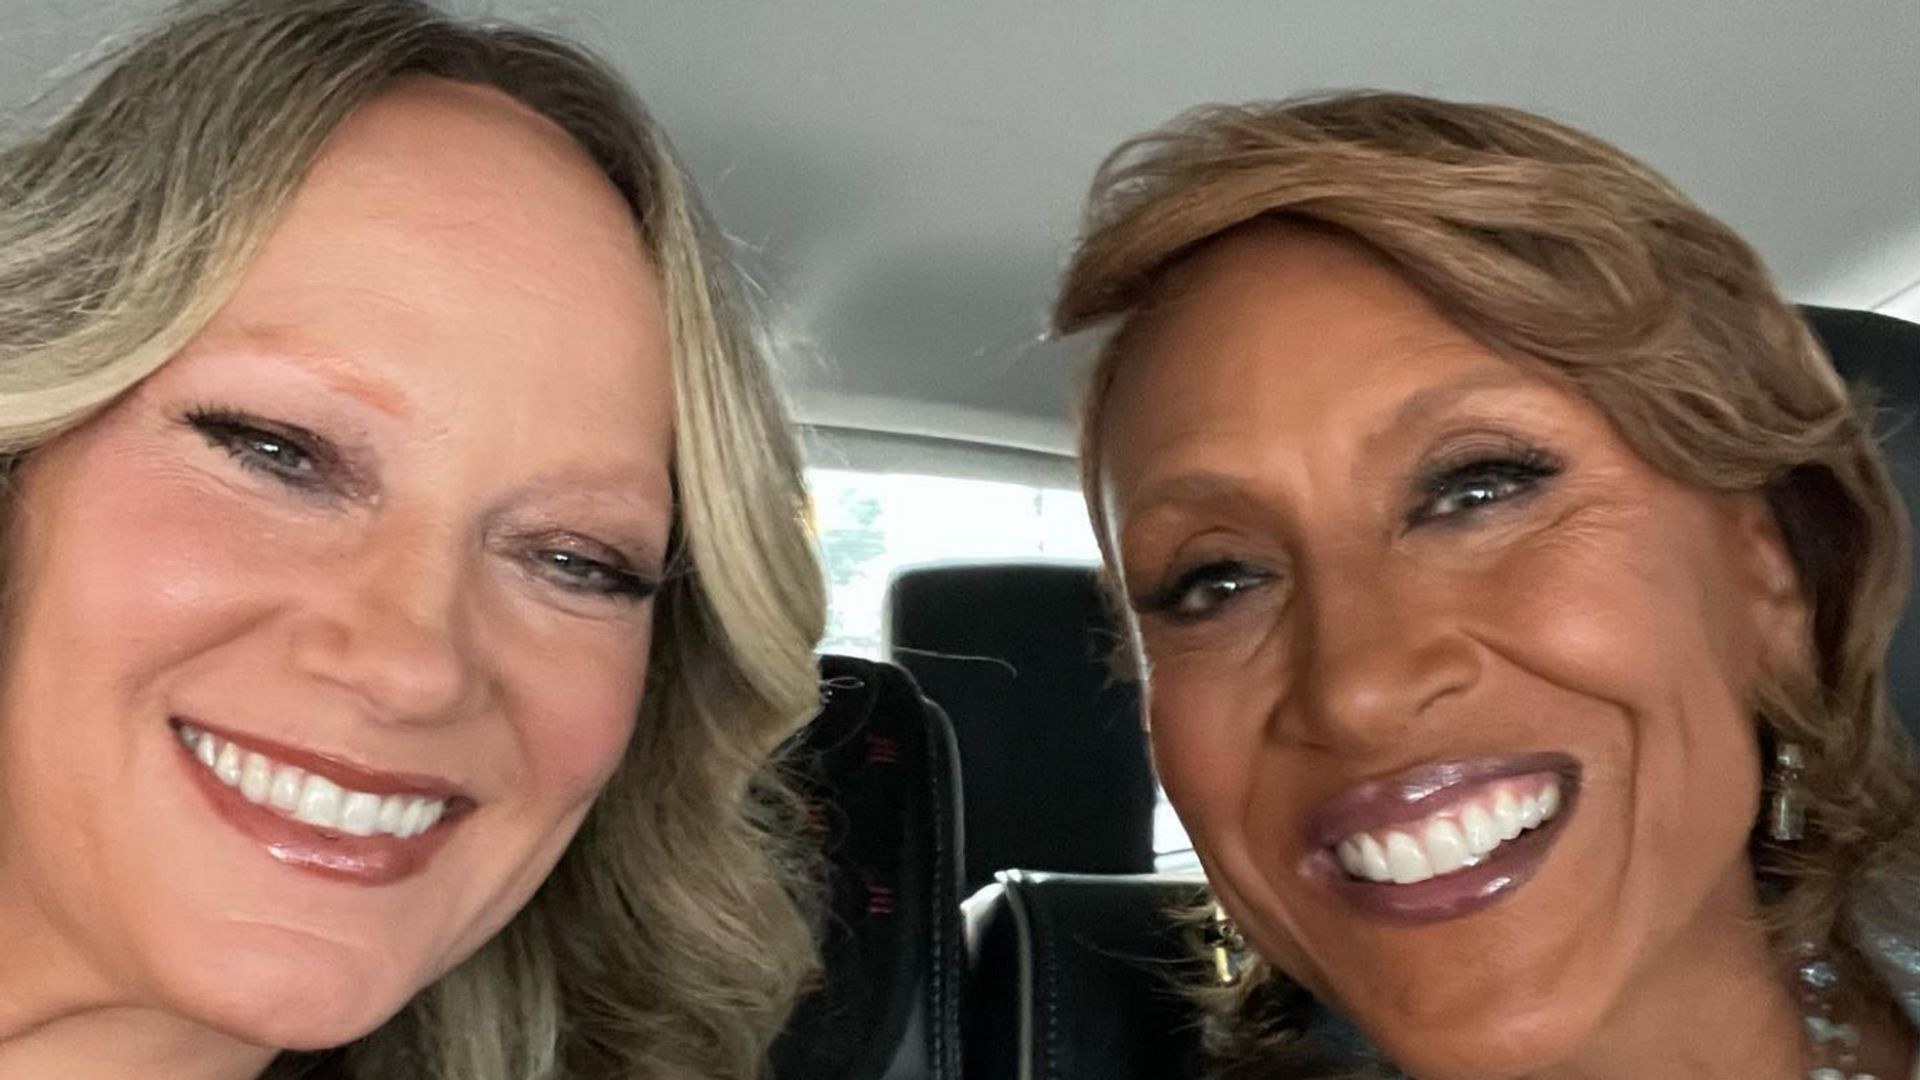 Photo posted by Robin Roberts on Instagram July 2023 alongside partner Amber Laign, with the caption: "Special date night with Sweet Amber.
Wishing all a fun, safe holiday weekend."